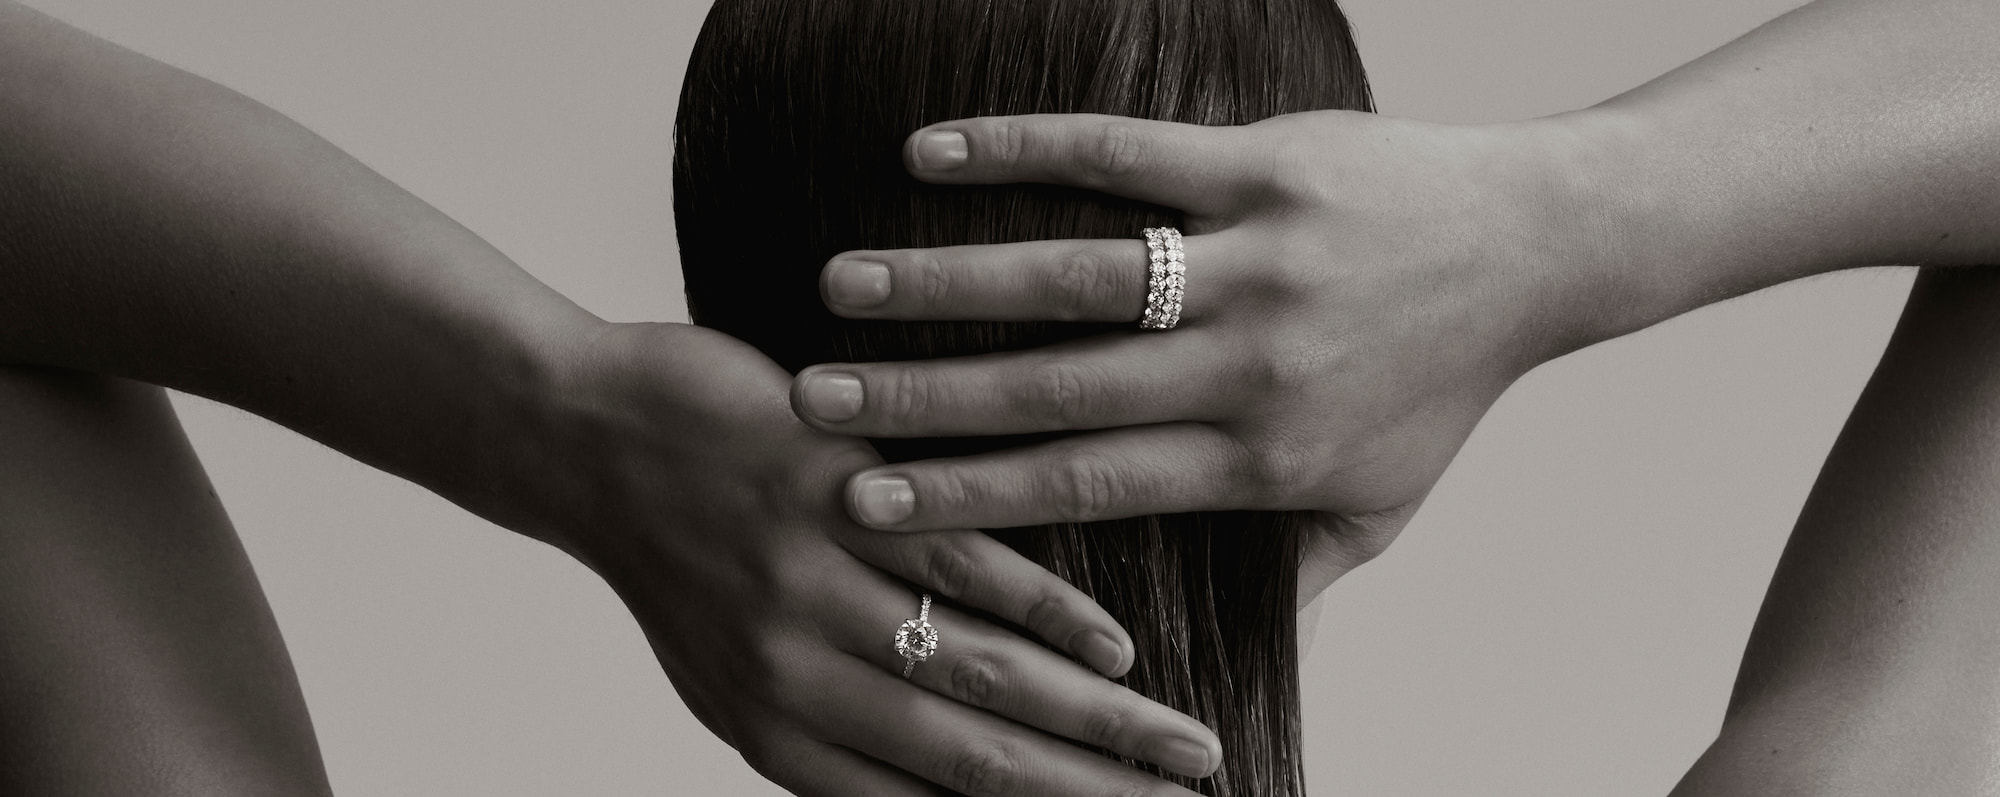 image taken from behind of a woman holding hear hair, wearing diamond rings